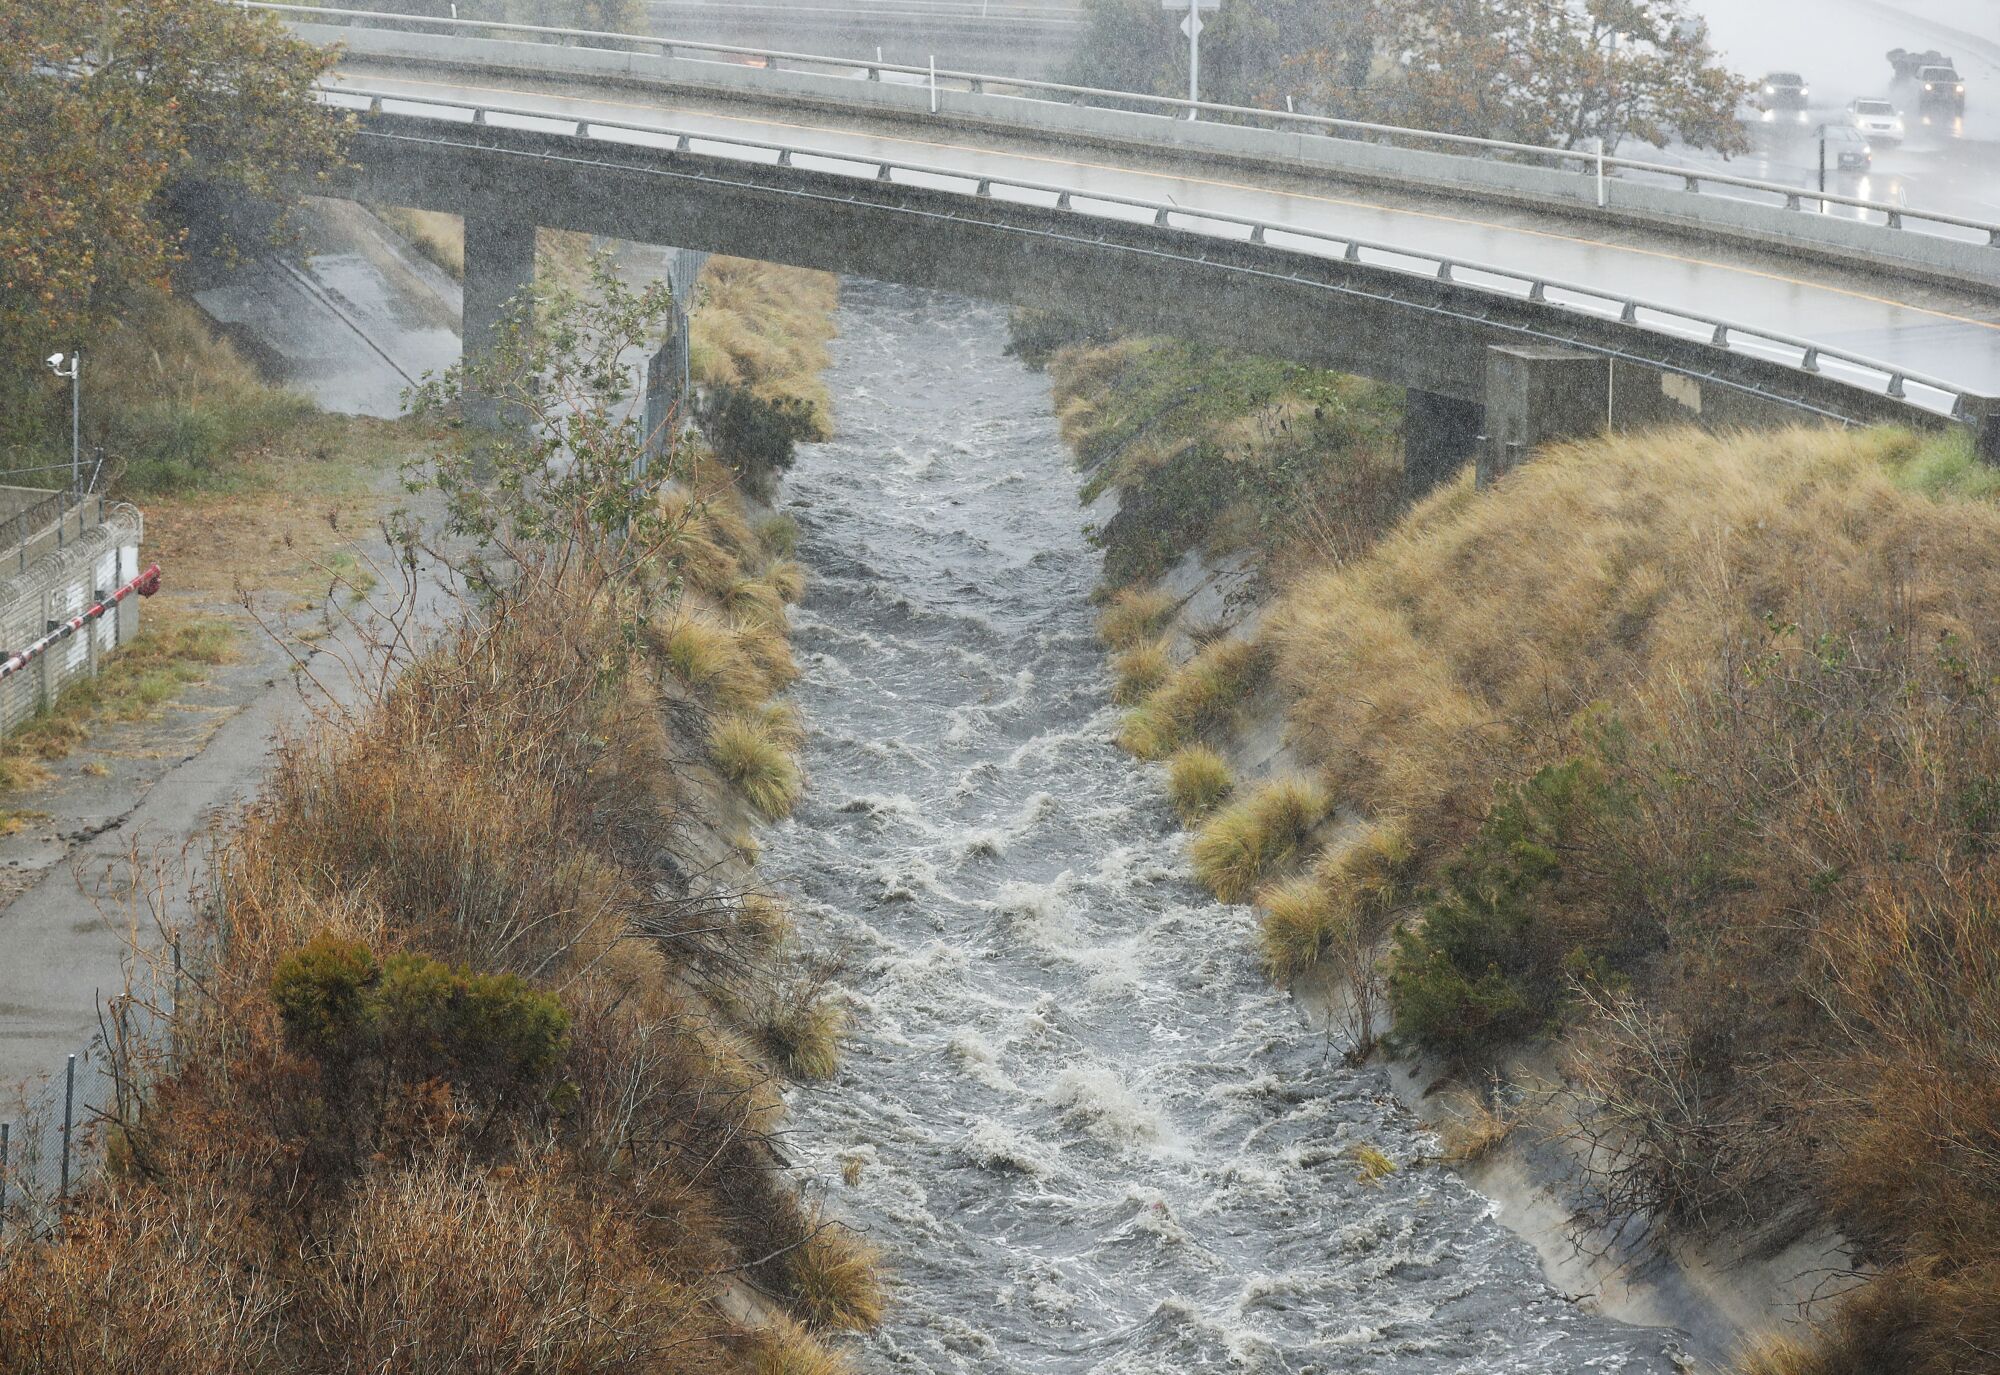 Water flows down a flood control channel along I-15 in Mission Valley 